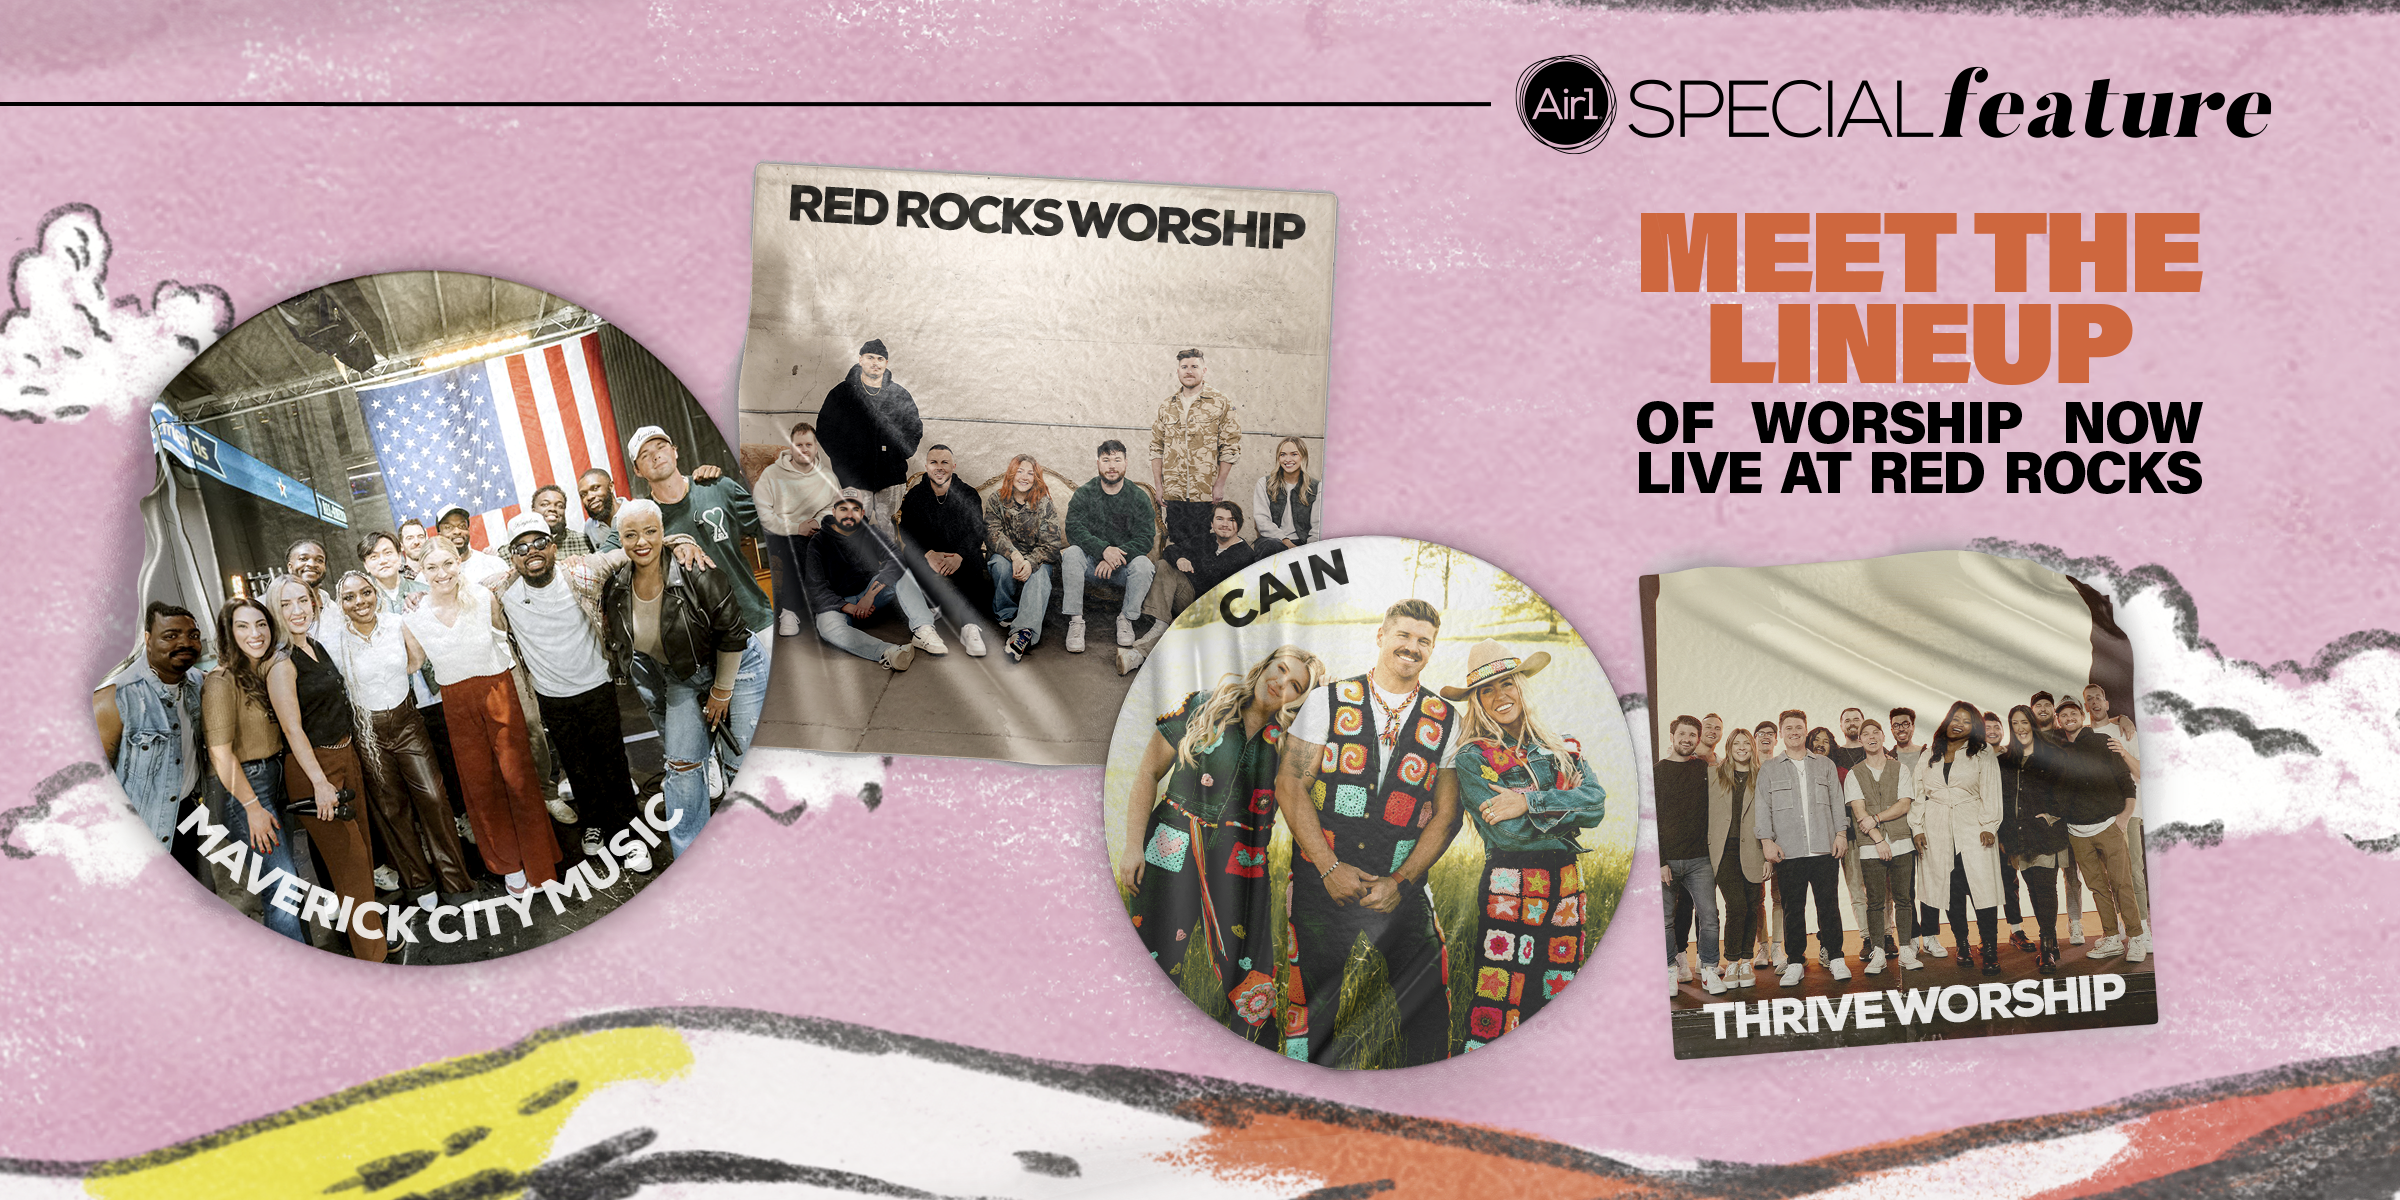 Meet the Lineup! of worship Now Live at Red Rocks